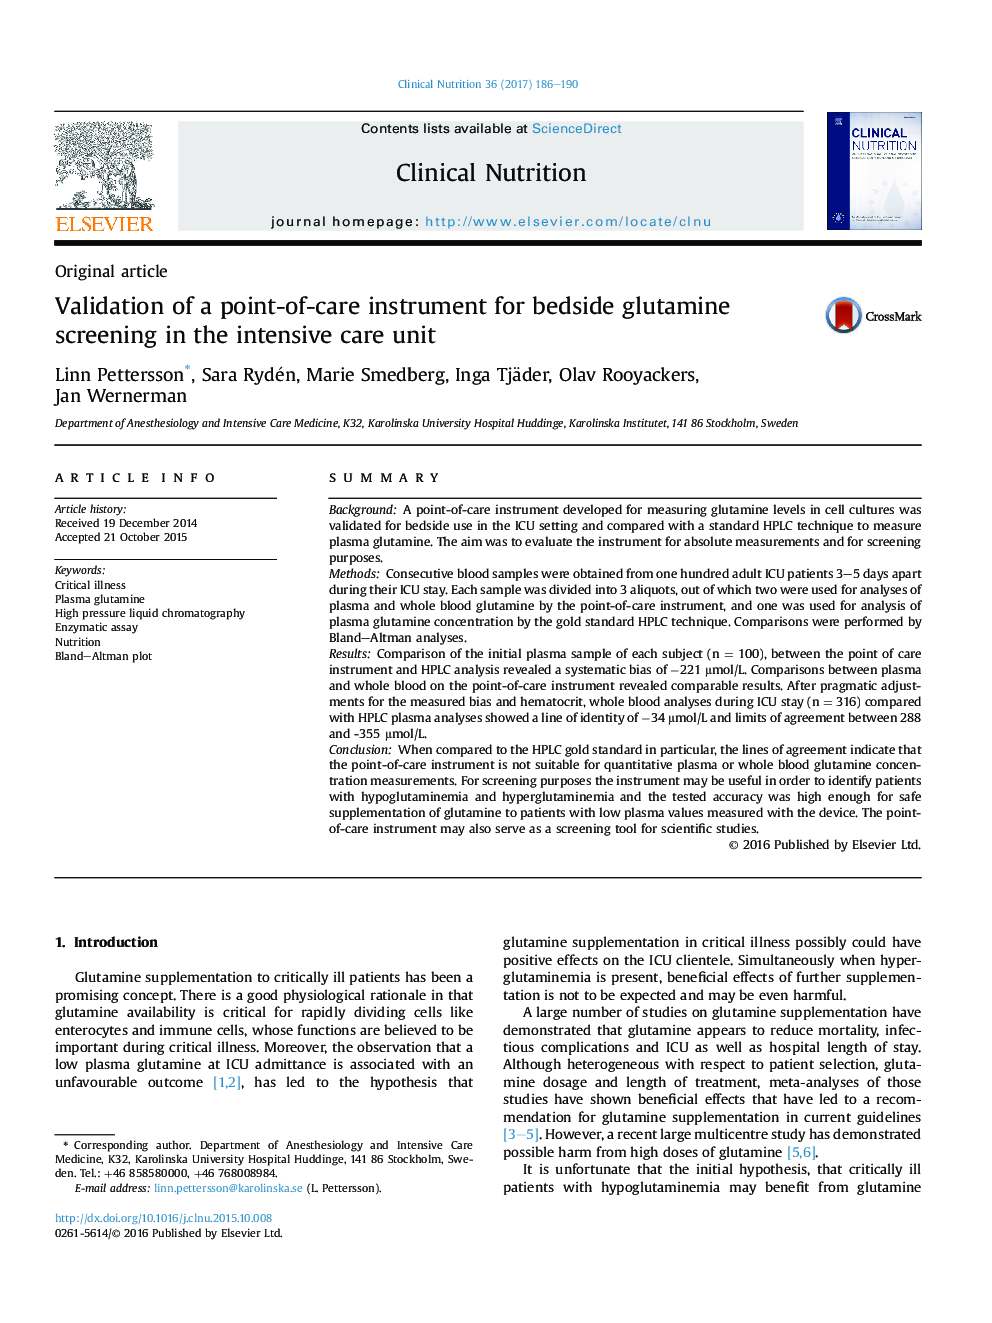 Original articleValidation of a point-of-care instrument for bedside glutamine screening in the intensive care unit